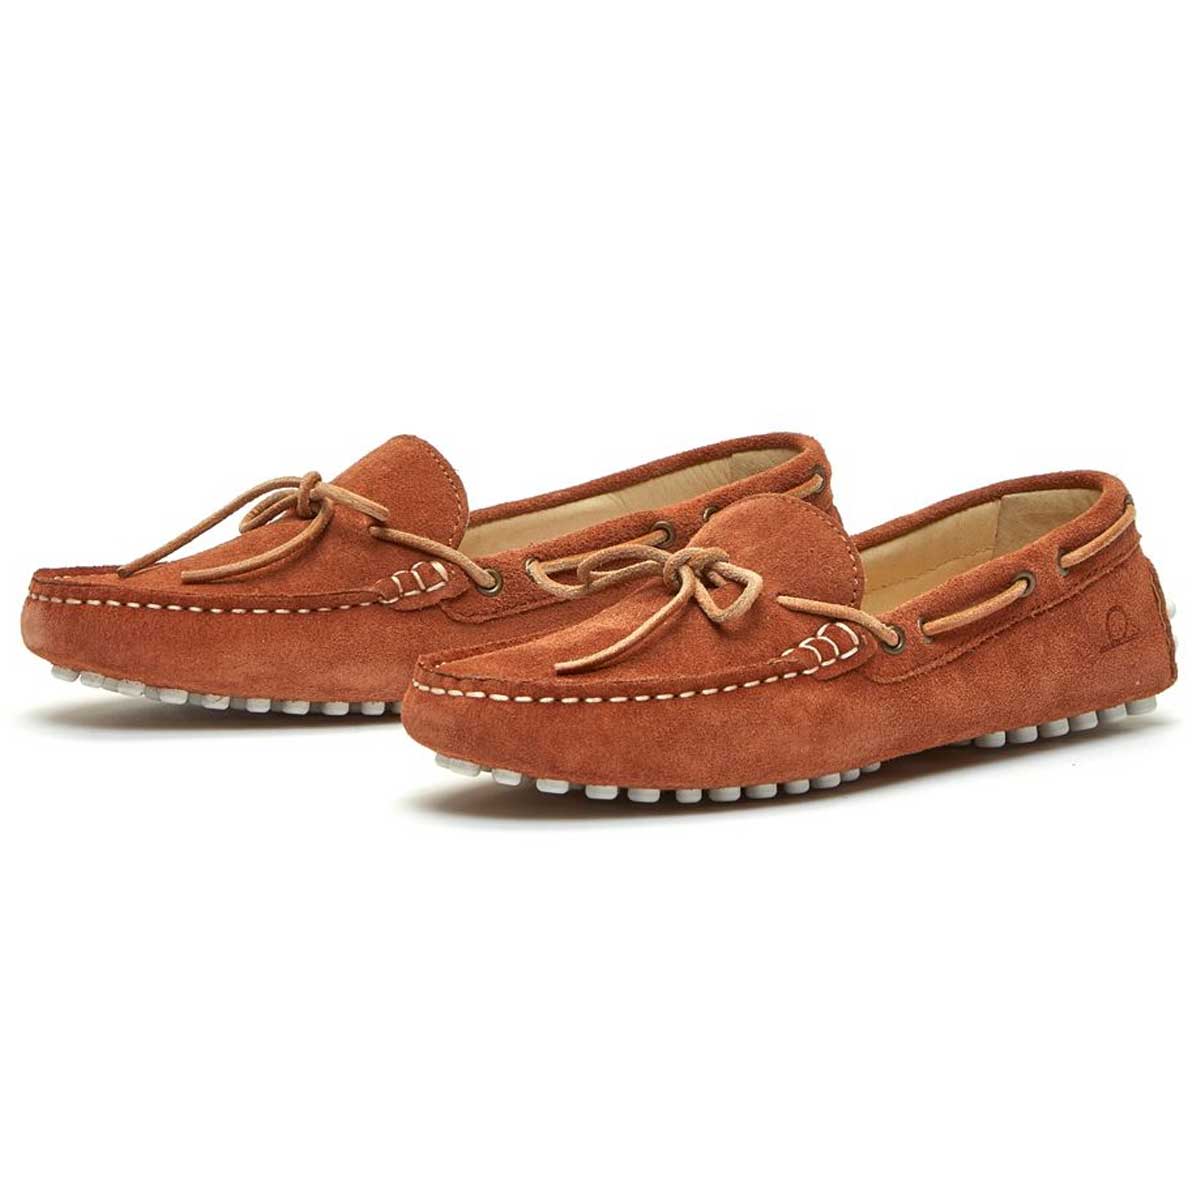 CHATHAM Aria Suede Driving Moccasins - Women's - Cognac